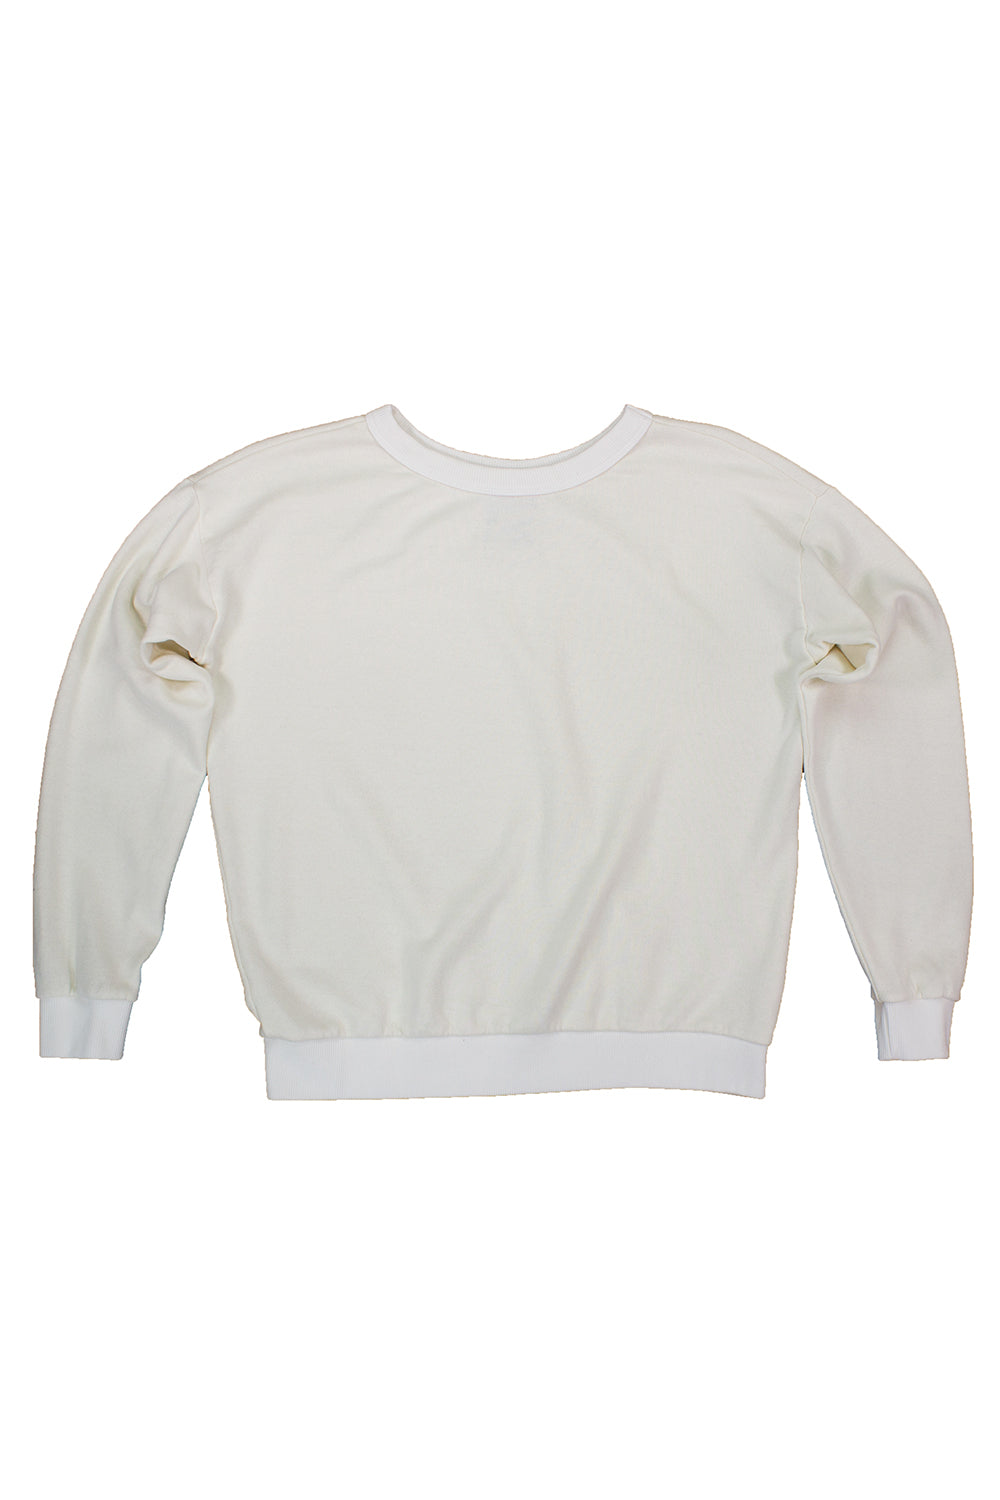 Crux Cropped Sweatshirt | Jungmaven Hemp Clothing & Accessories / Color: Washed White